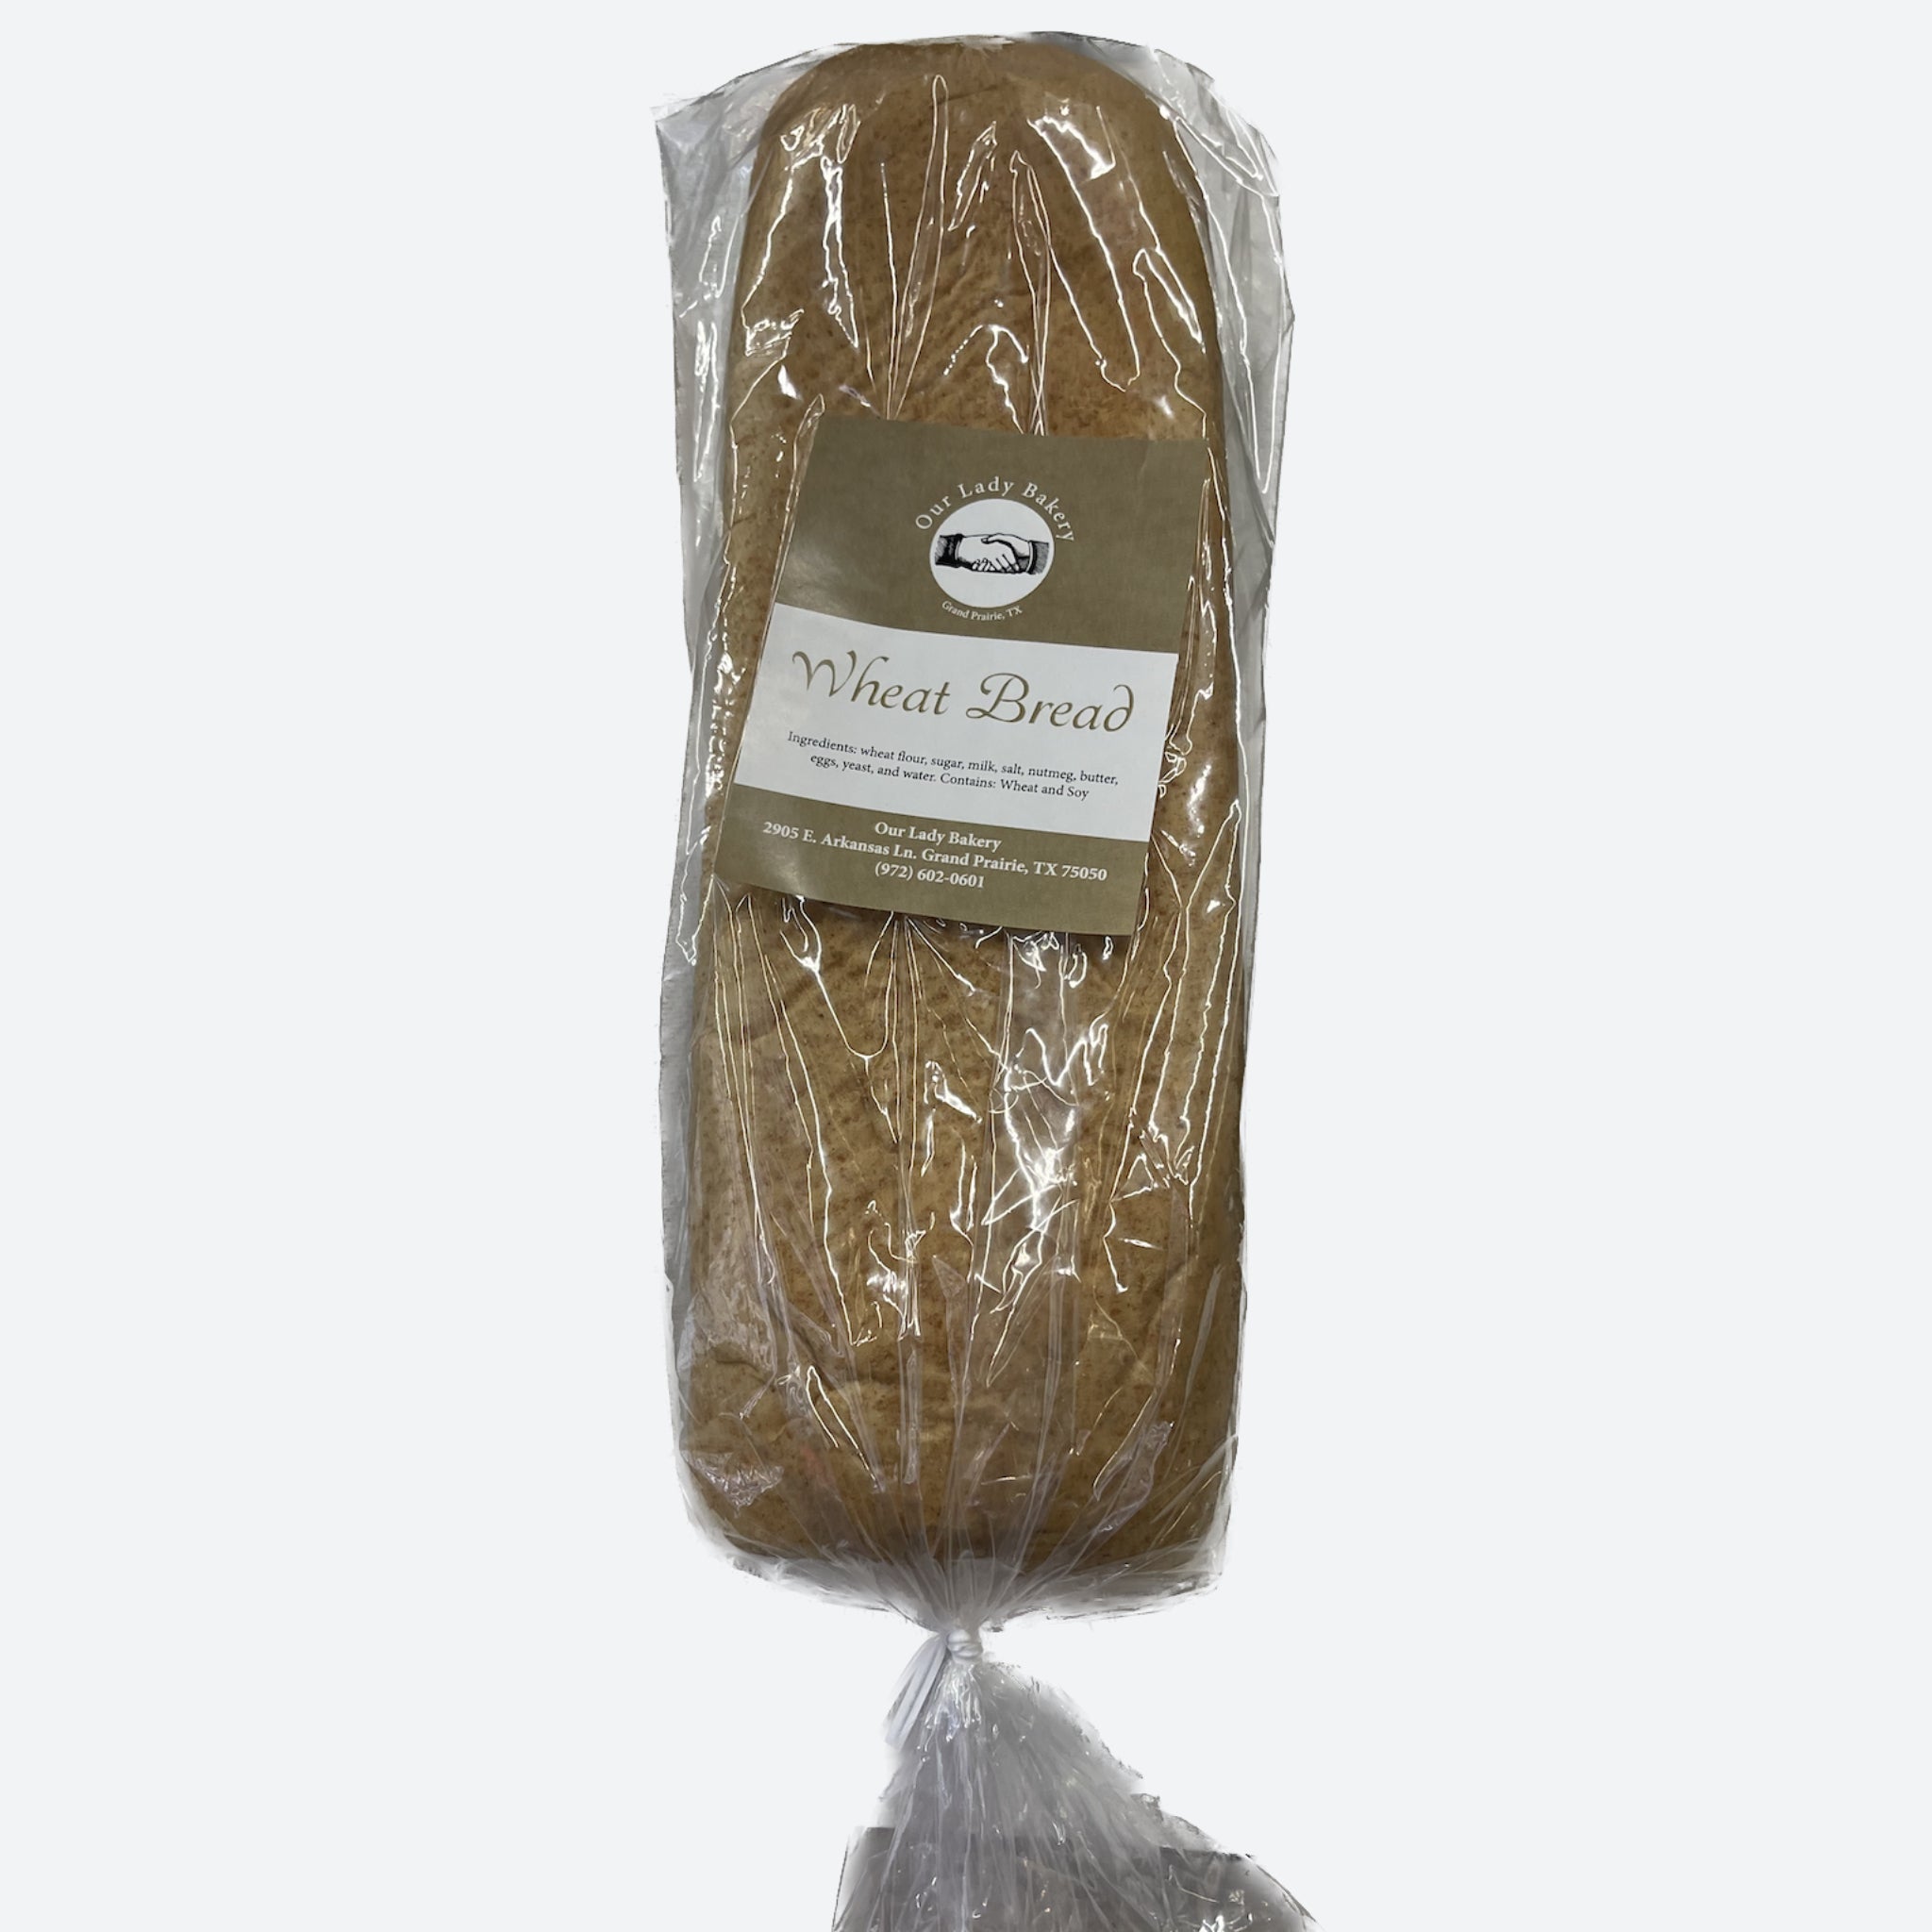 Our Lady Bakery Wheat Bread